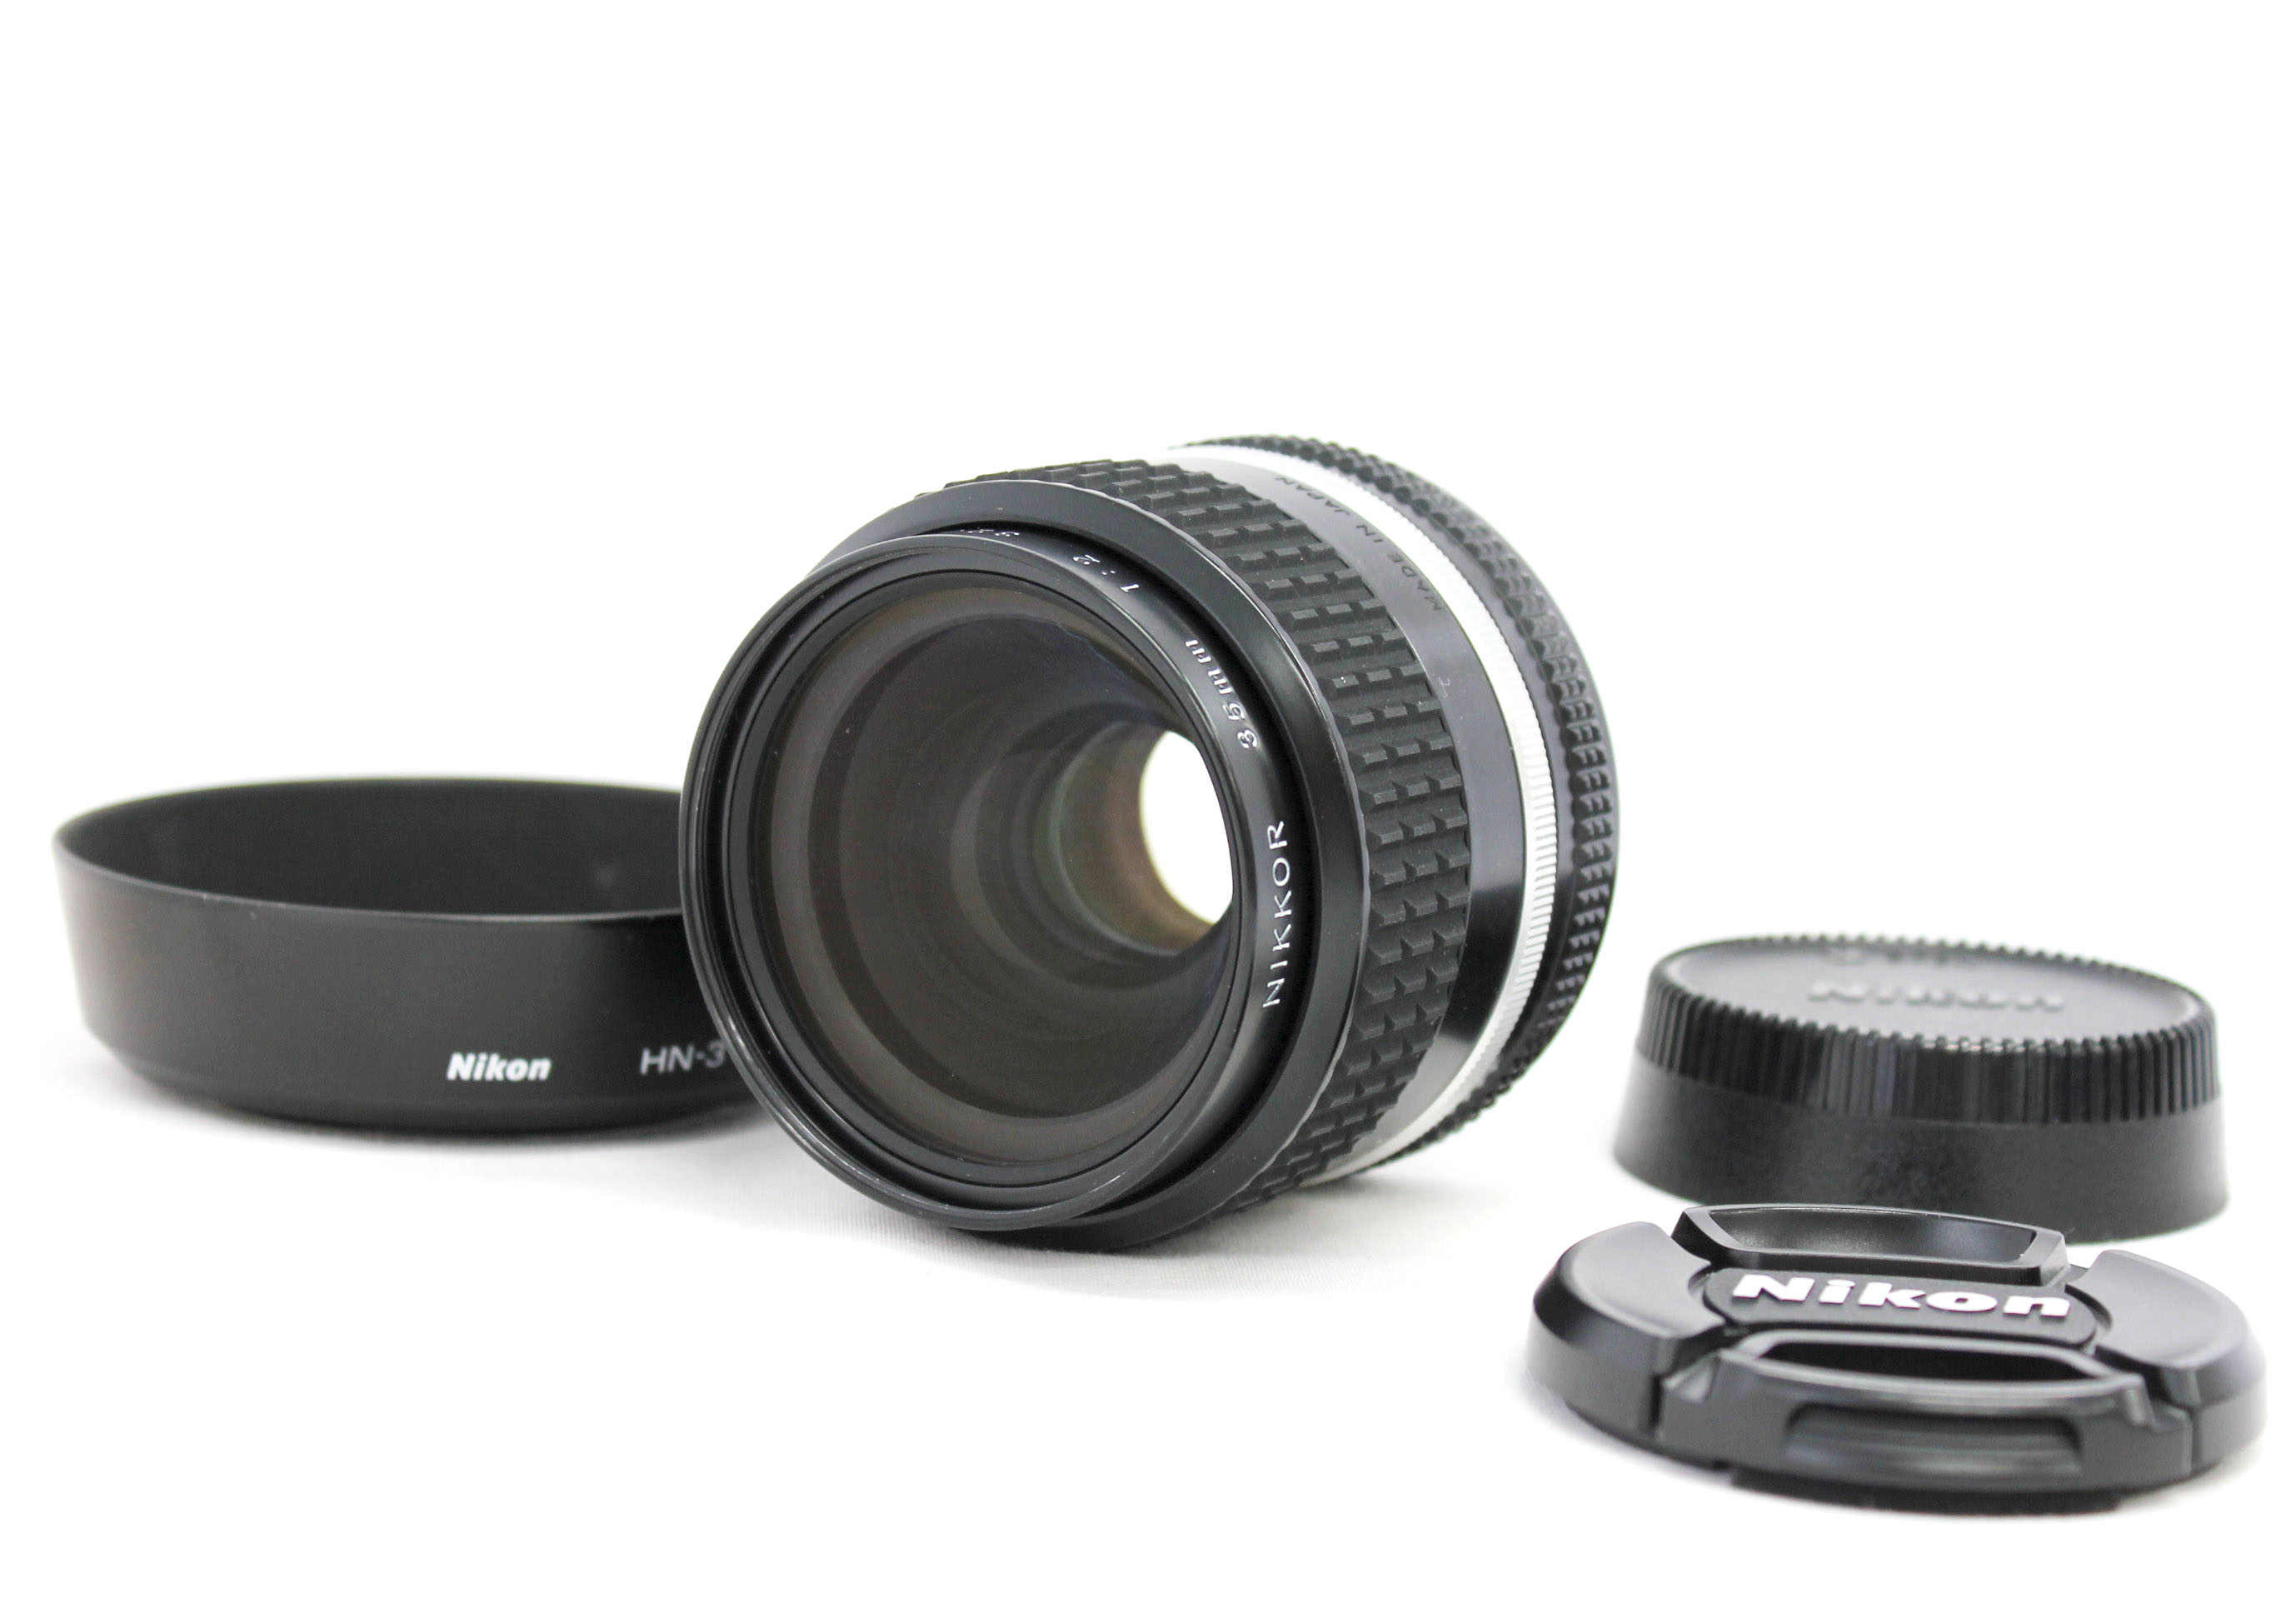 Nikon Ai-s Ais Nikkor 35mm F/2 Wide Angle MF Lens S/N32* SIC Version with Hood HN-3 from Japan Photo 0